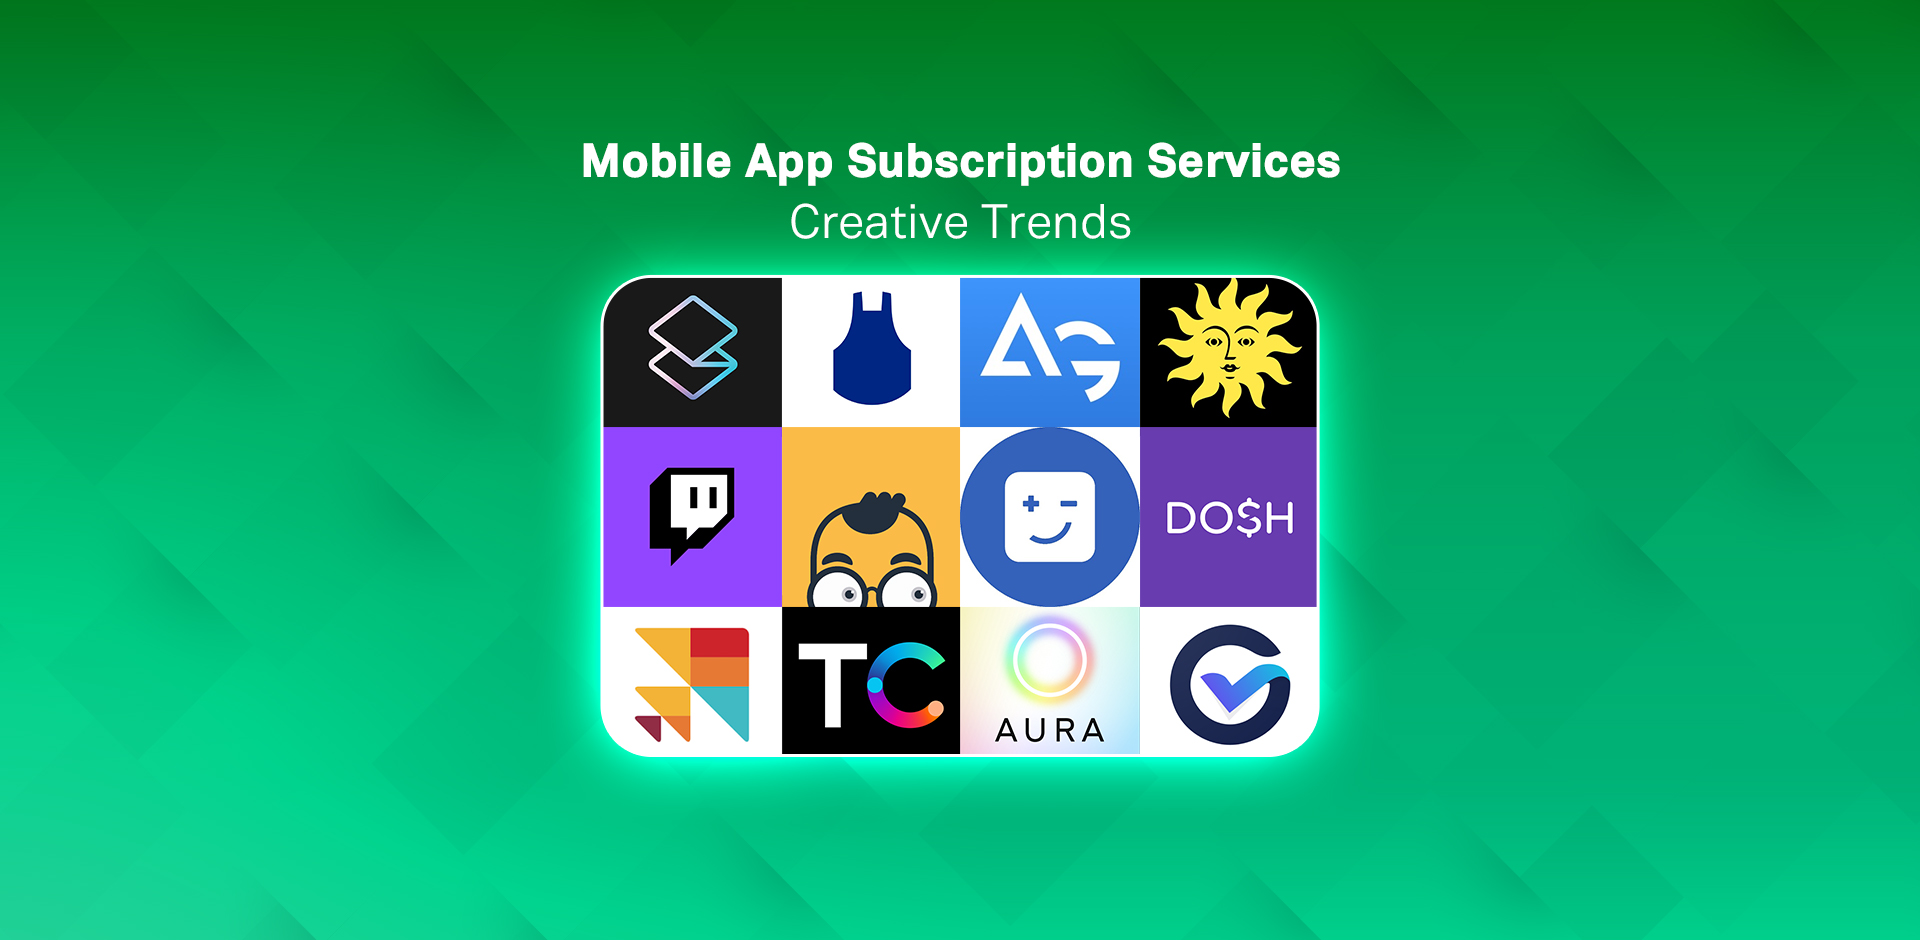 How To Produce Winning Ad Creative For Mobile App Subscription Services